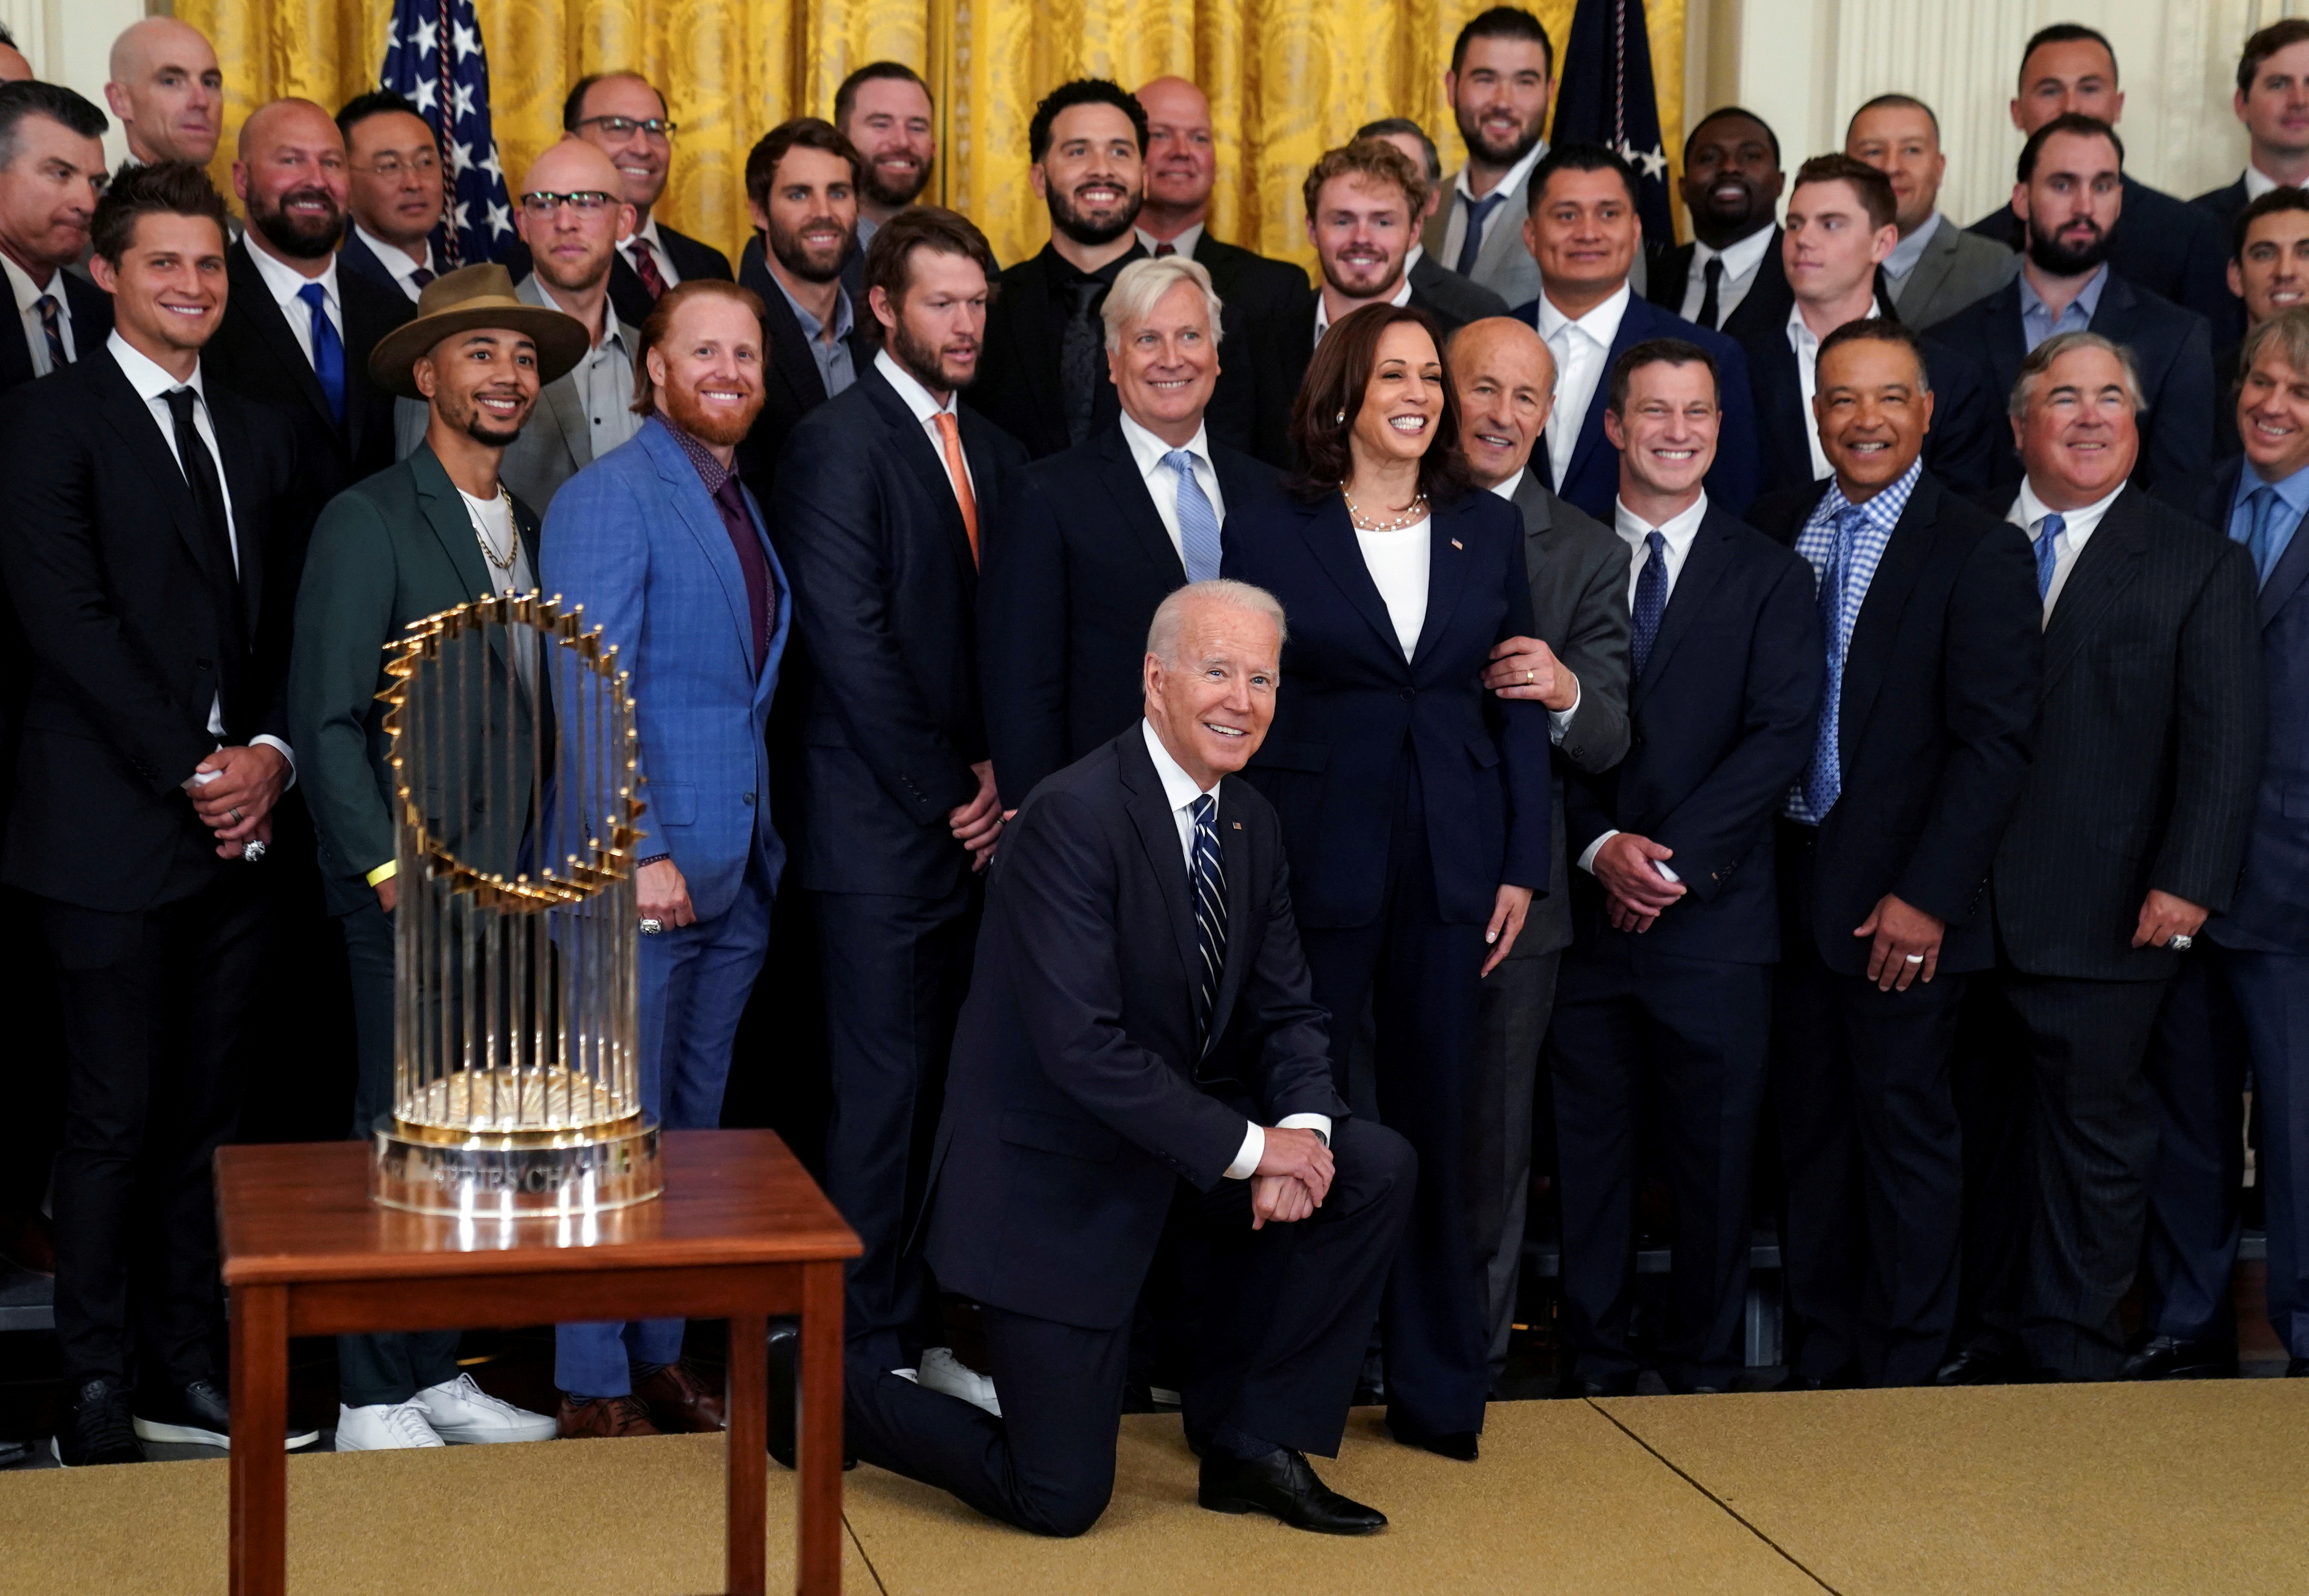 U.S. President Joe Biden and Vice President Kamala Harris pose with members of the 2020 World Series Champion Los Angeles Dodgers during an event honoring the team at the White House in Washington, U.S., July 2, 2021. REUTERS/Kevin Lamarque/